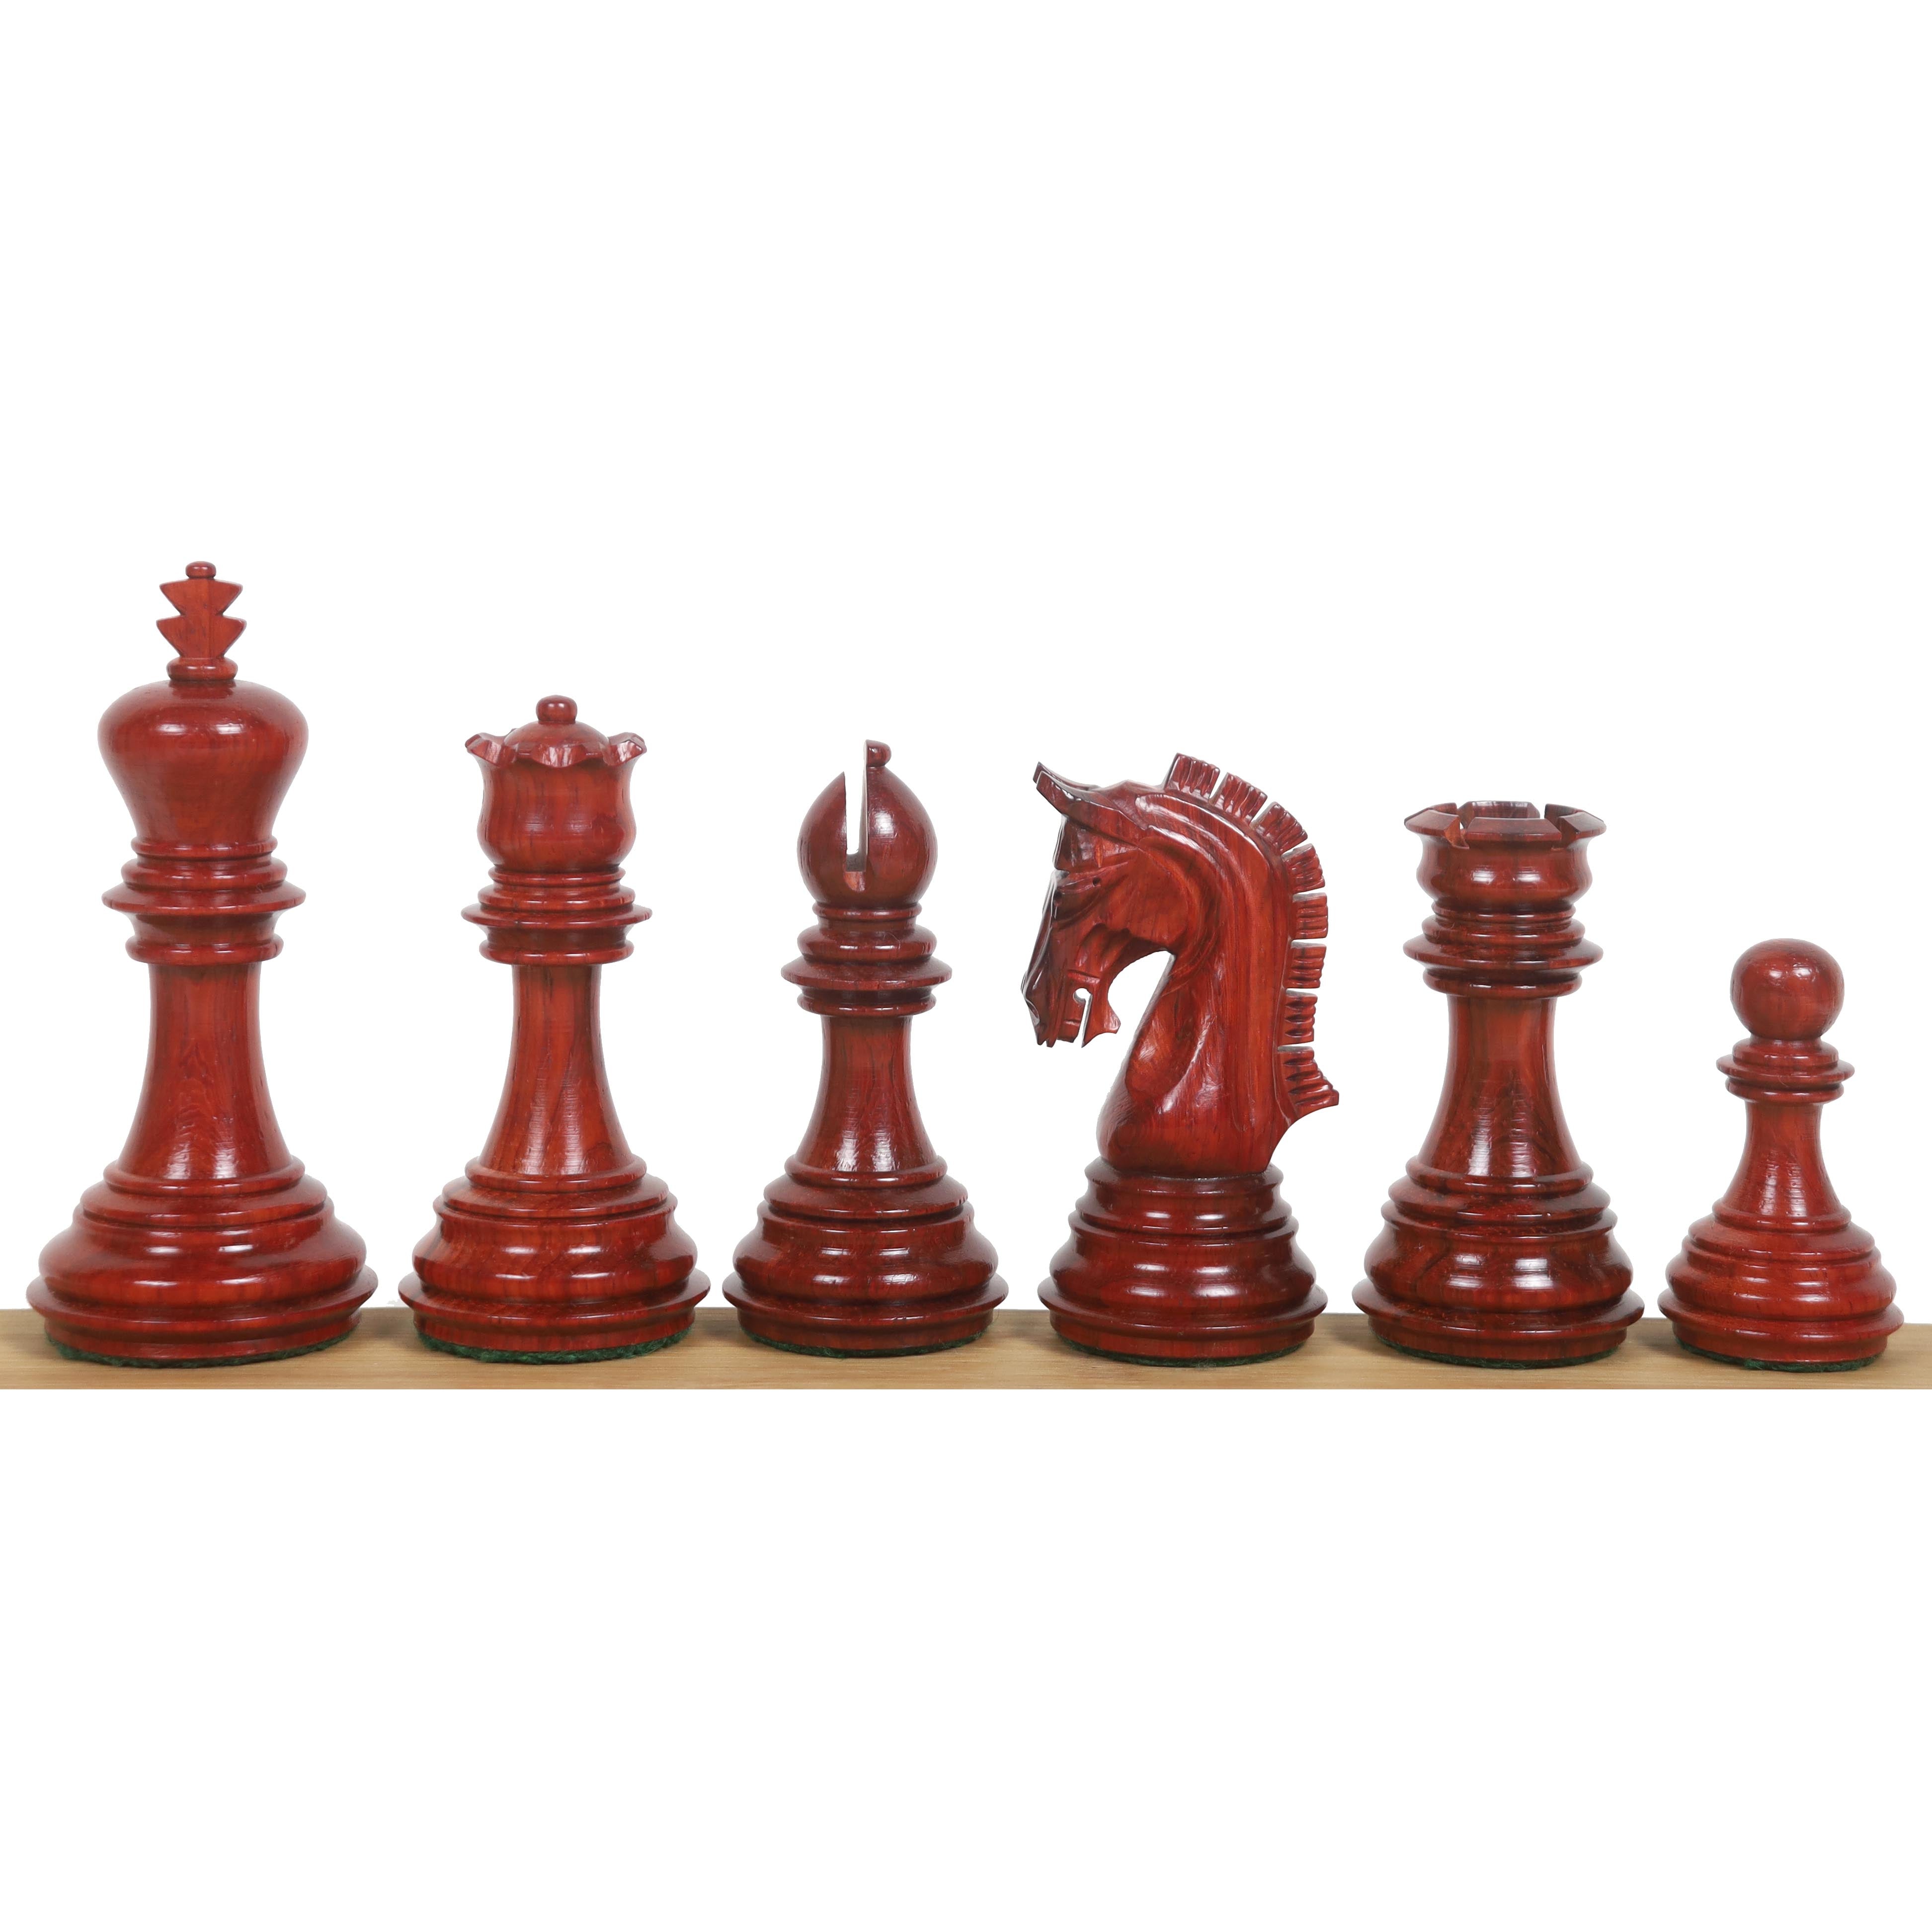 3.8" Imperial Staunton Chess Set Combo - Pieces in Bud Rose Wood with 21" Chess Board